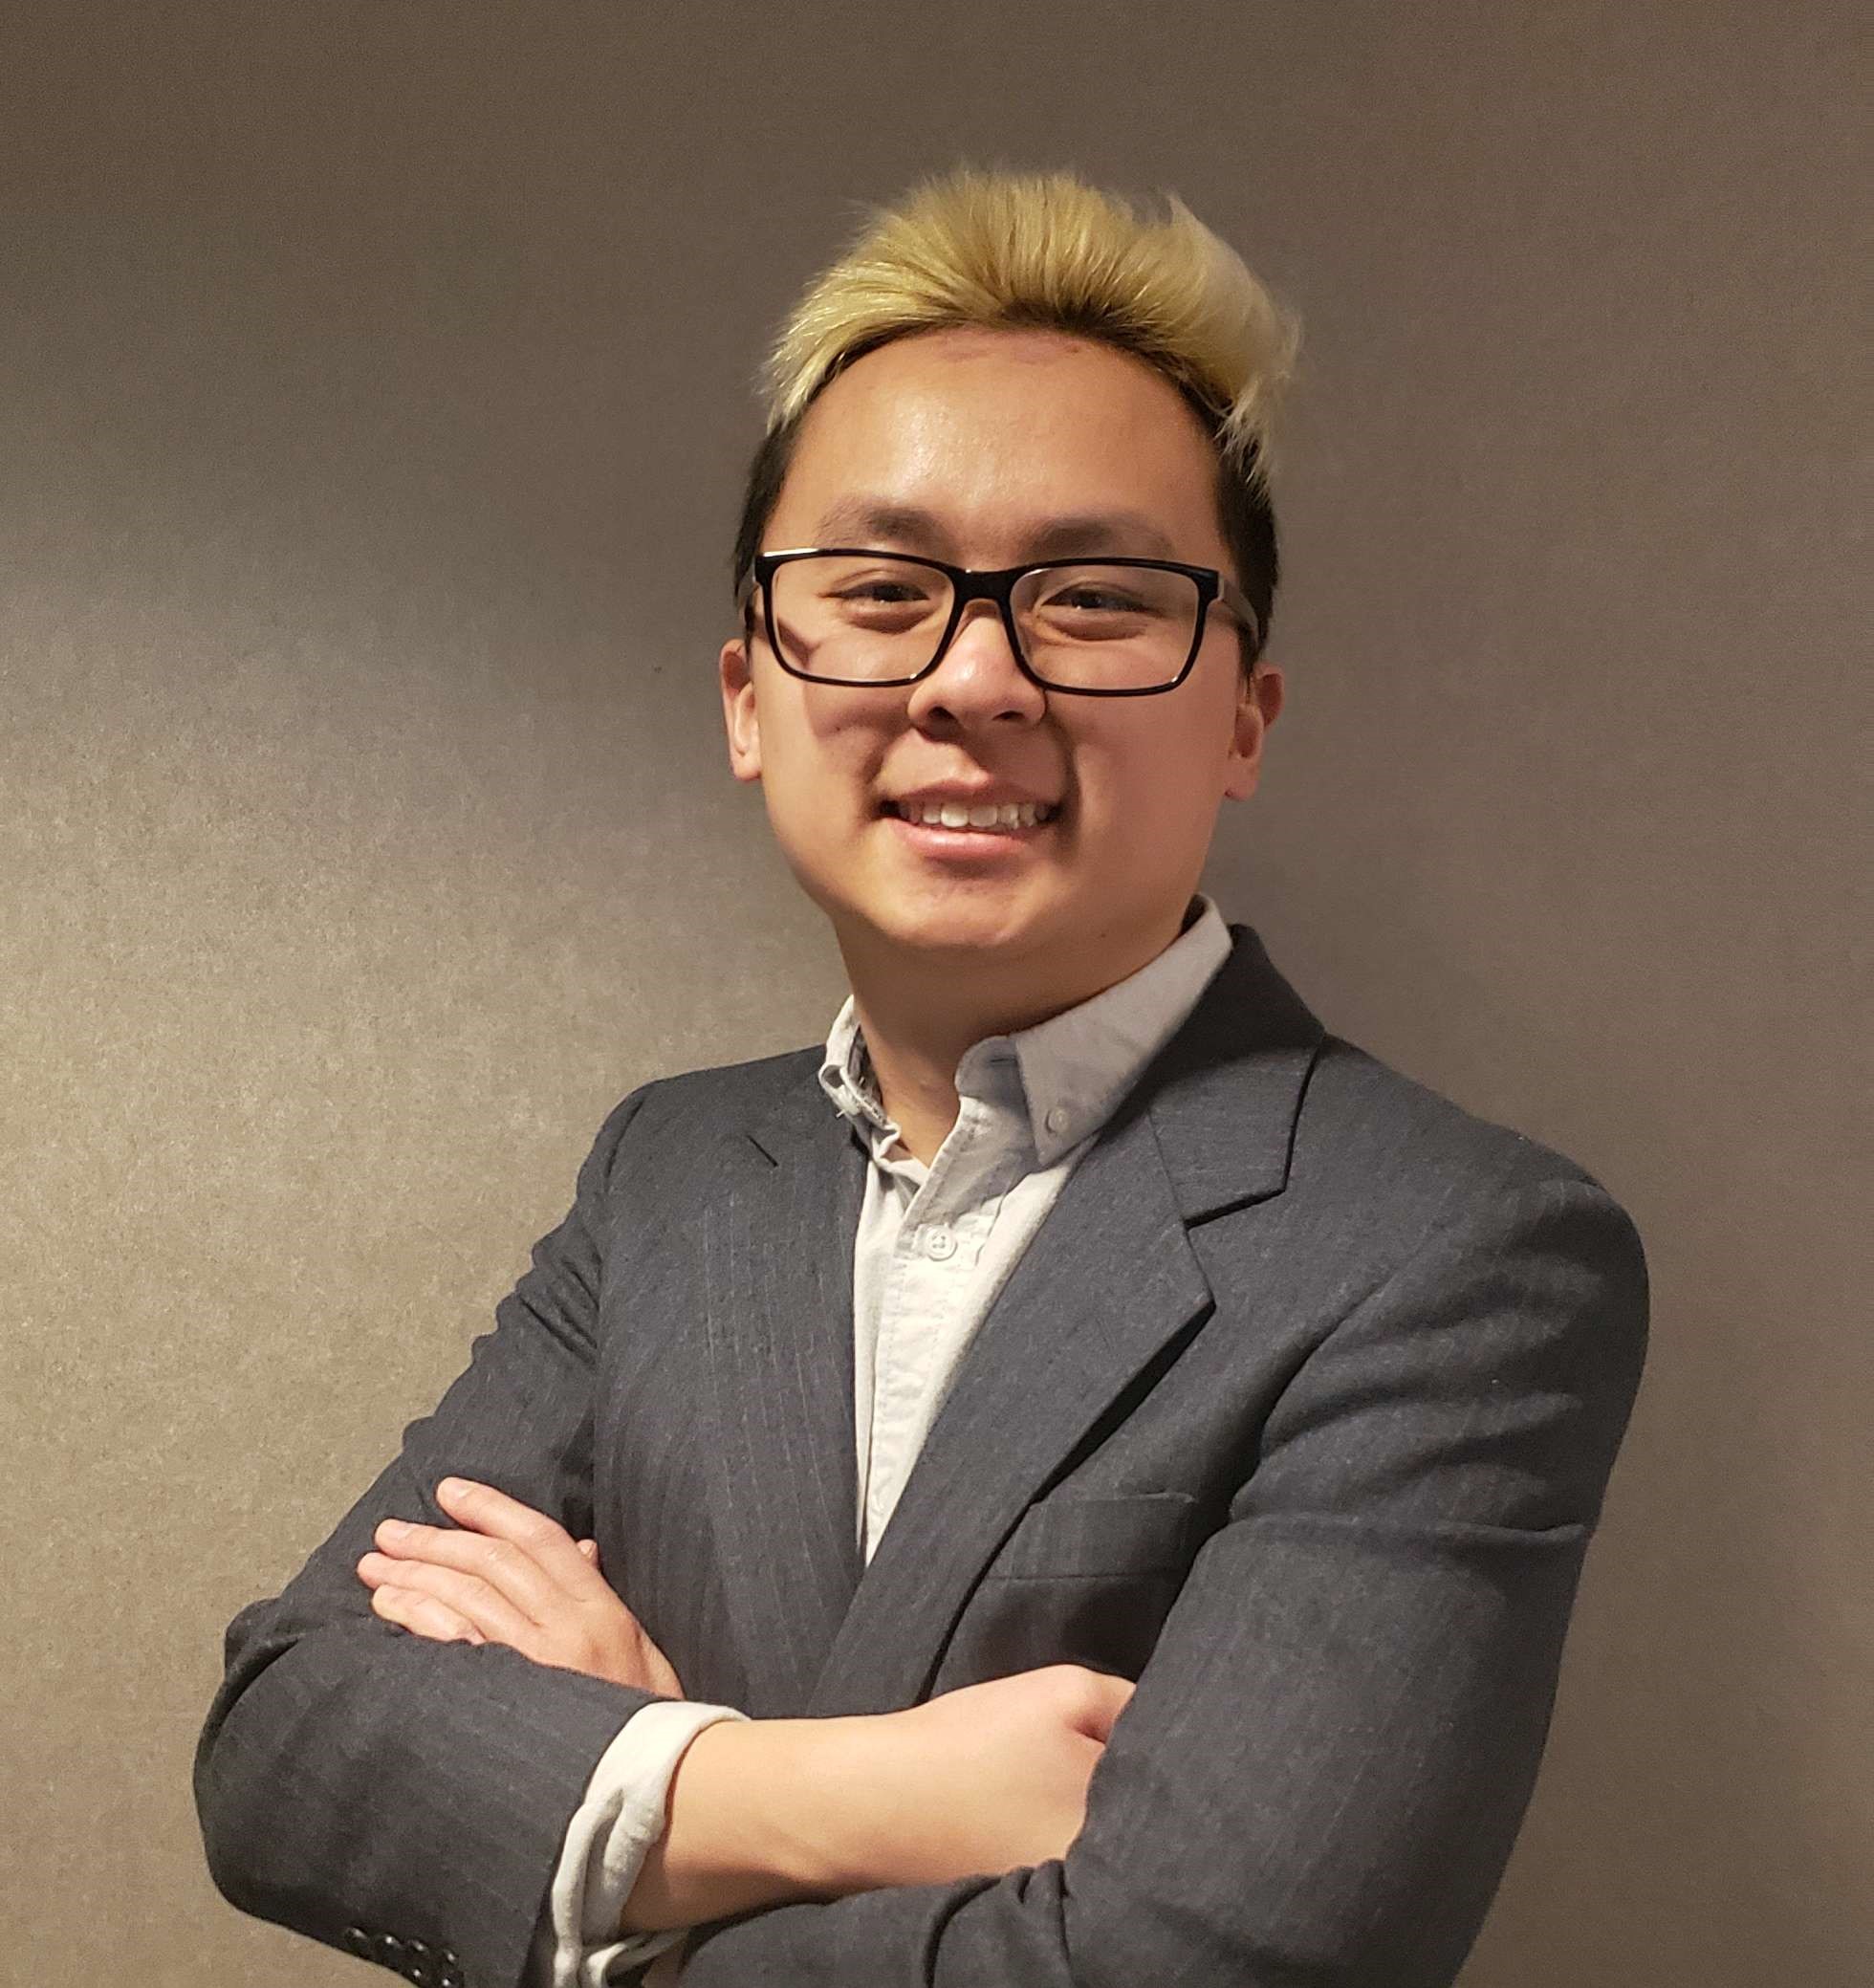 A portrait of me against a wall wearing a nice business suit with my arms folded.  I'm a young and average build Vietnamese-American man in my mid-20s with dyed blond hair at the top, black sideburns, and glasses.